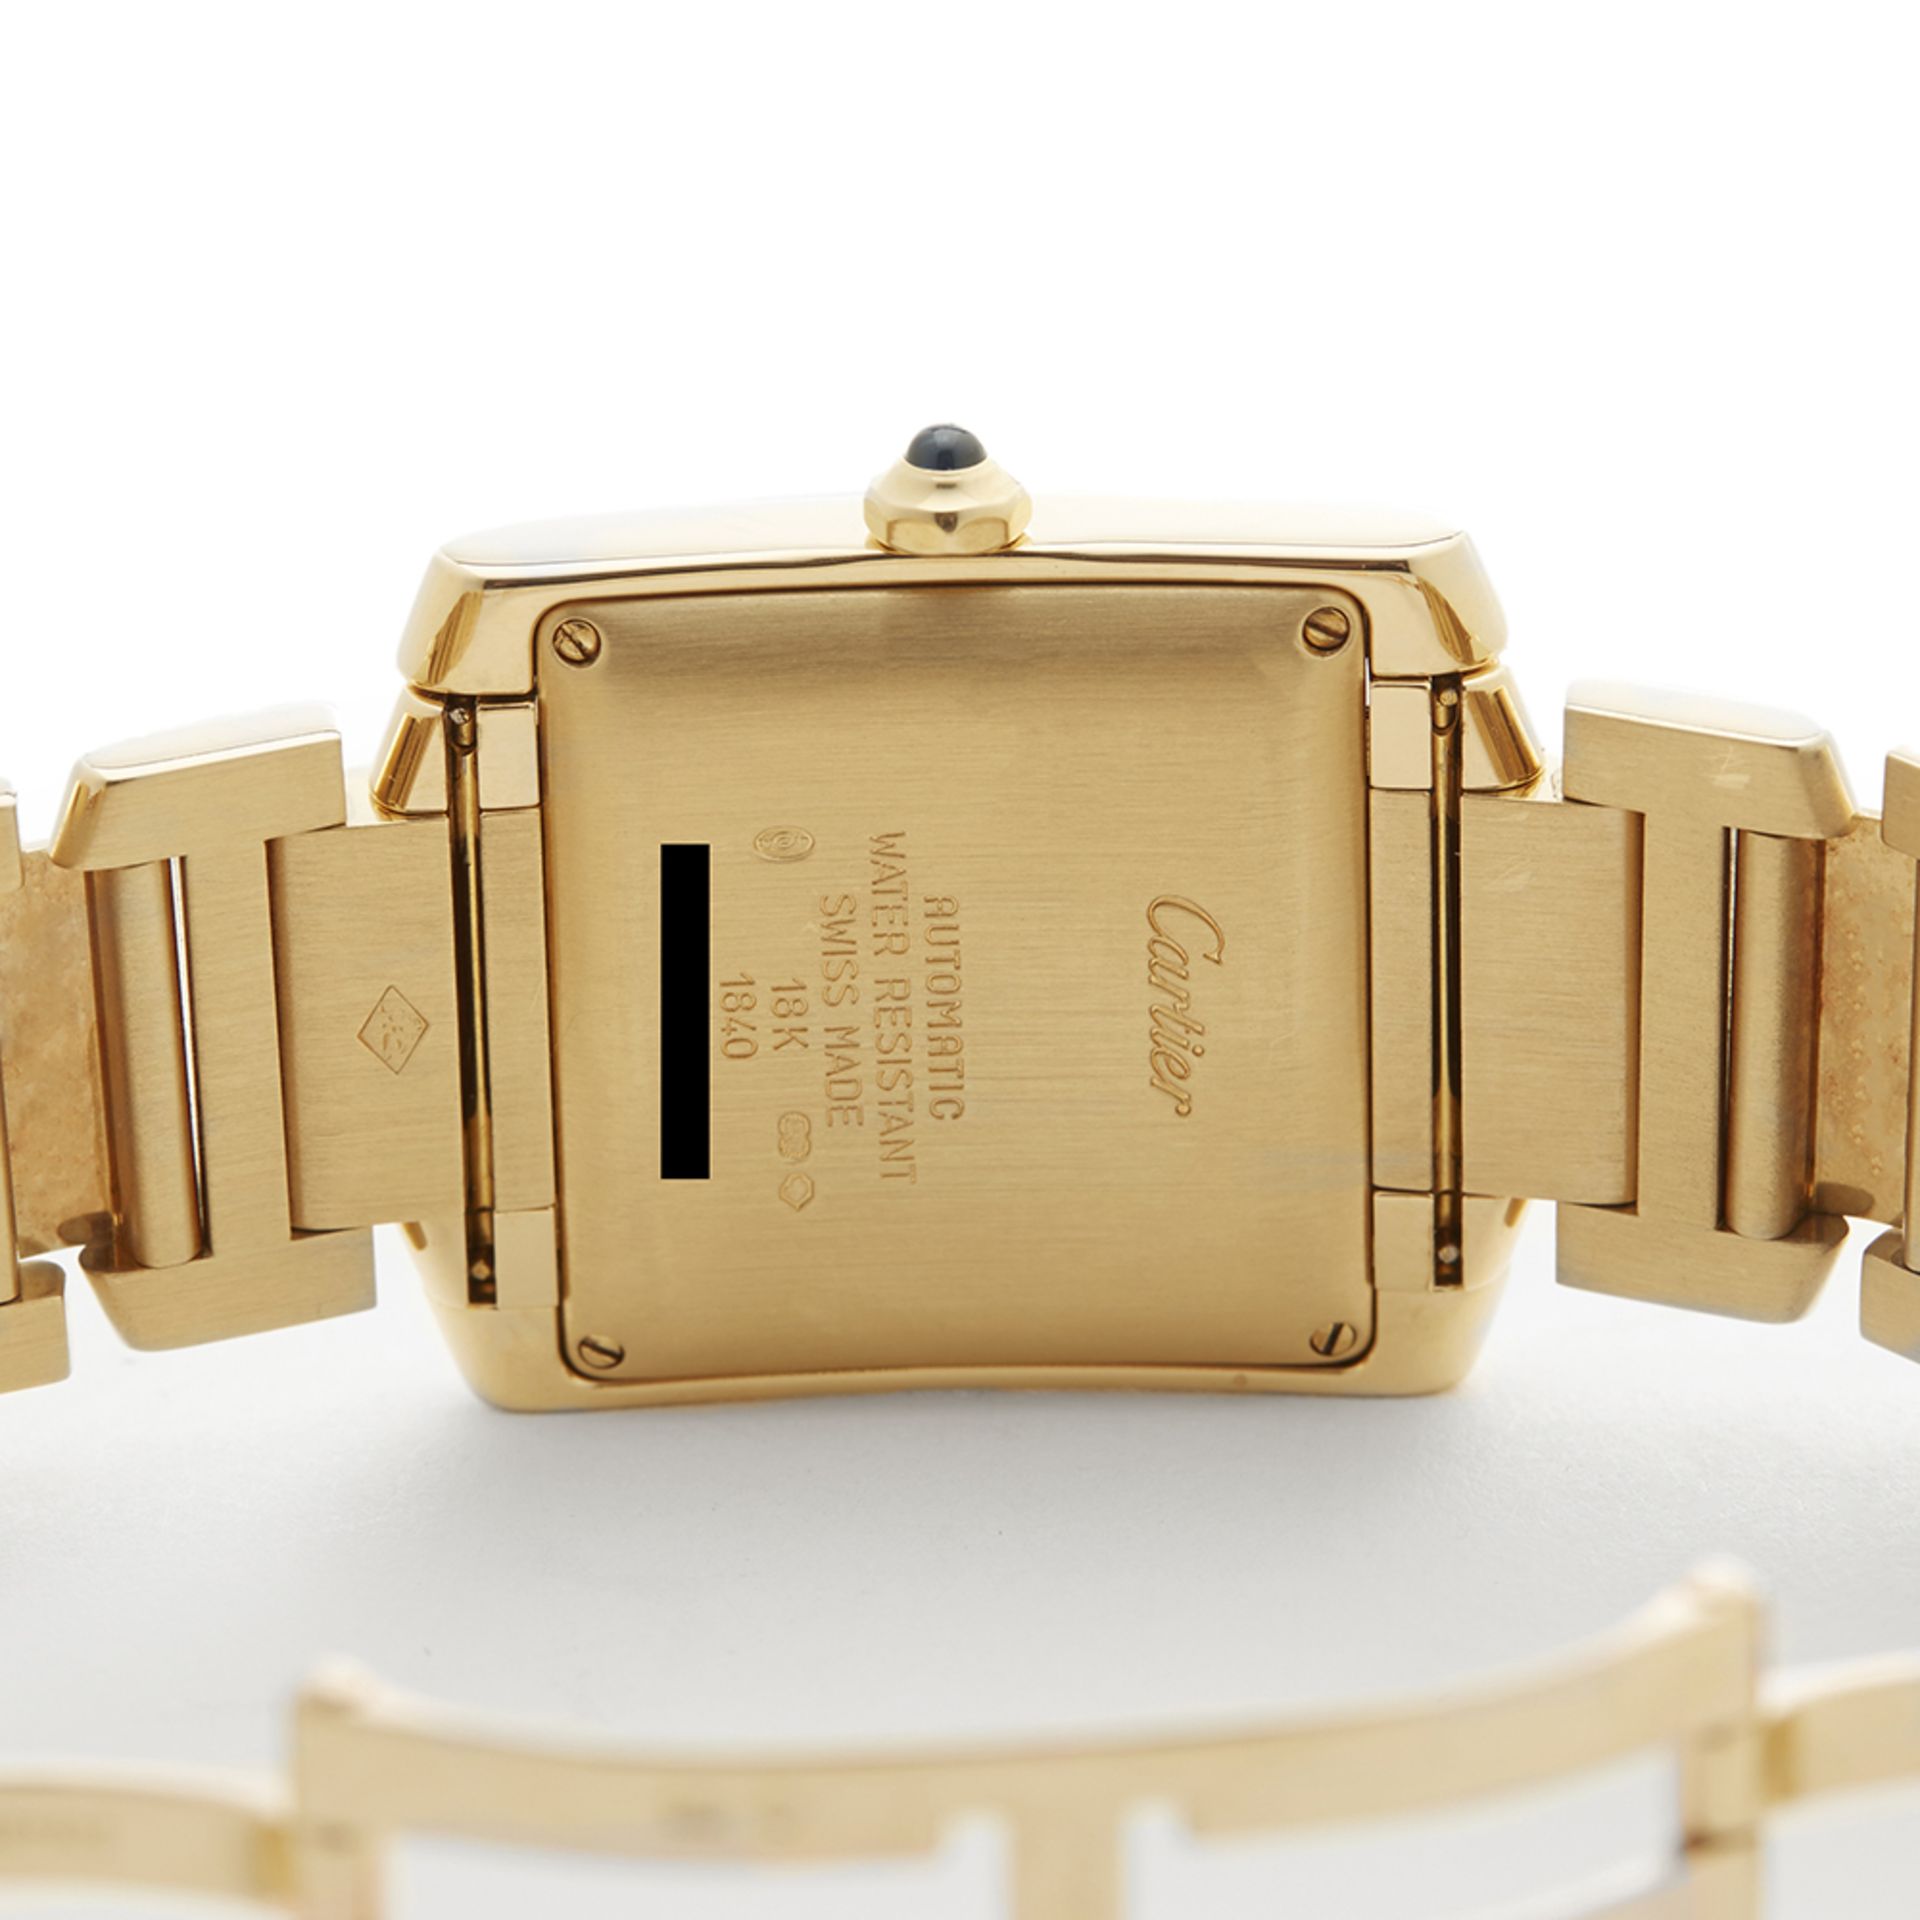 Cartier Tank Francaise 28mm 18k Yellow Gold - 1840 or W50001R2 - Image 8 of 8